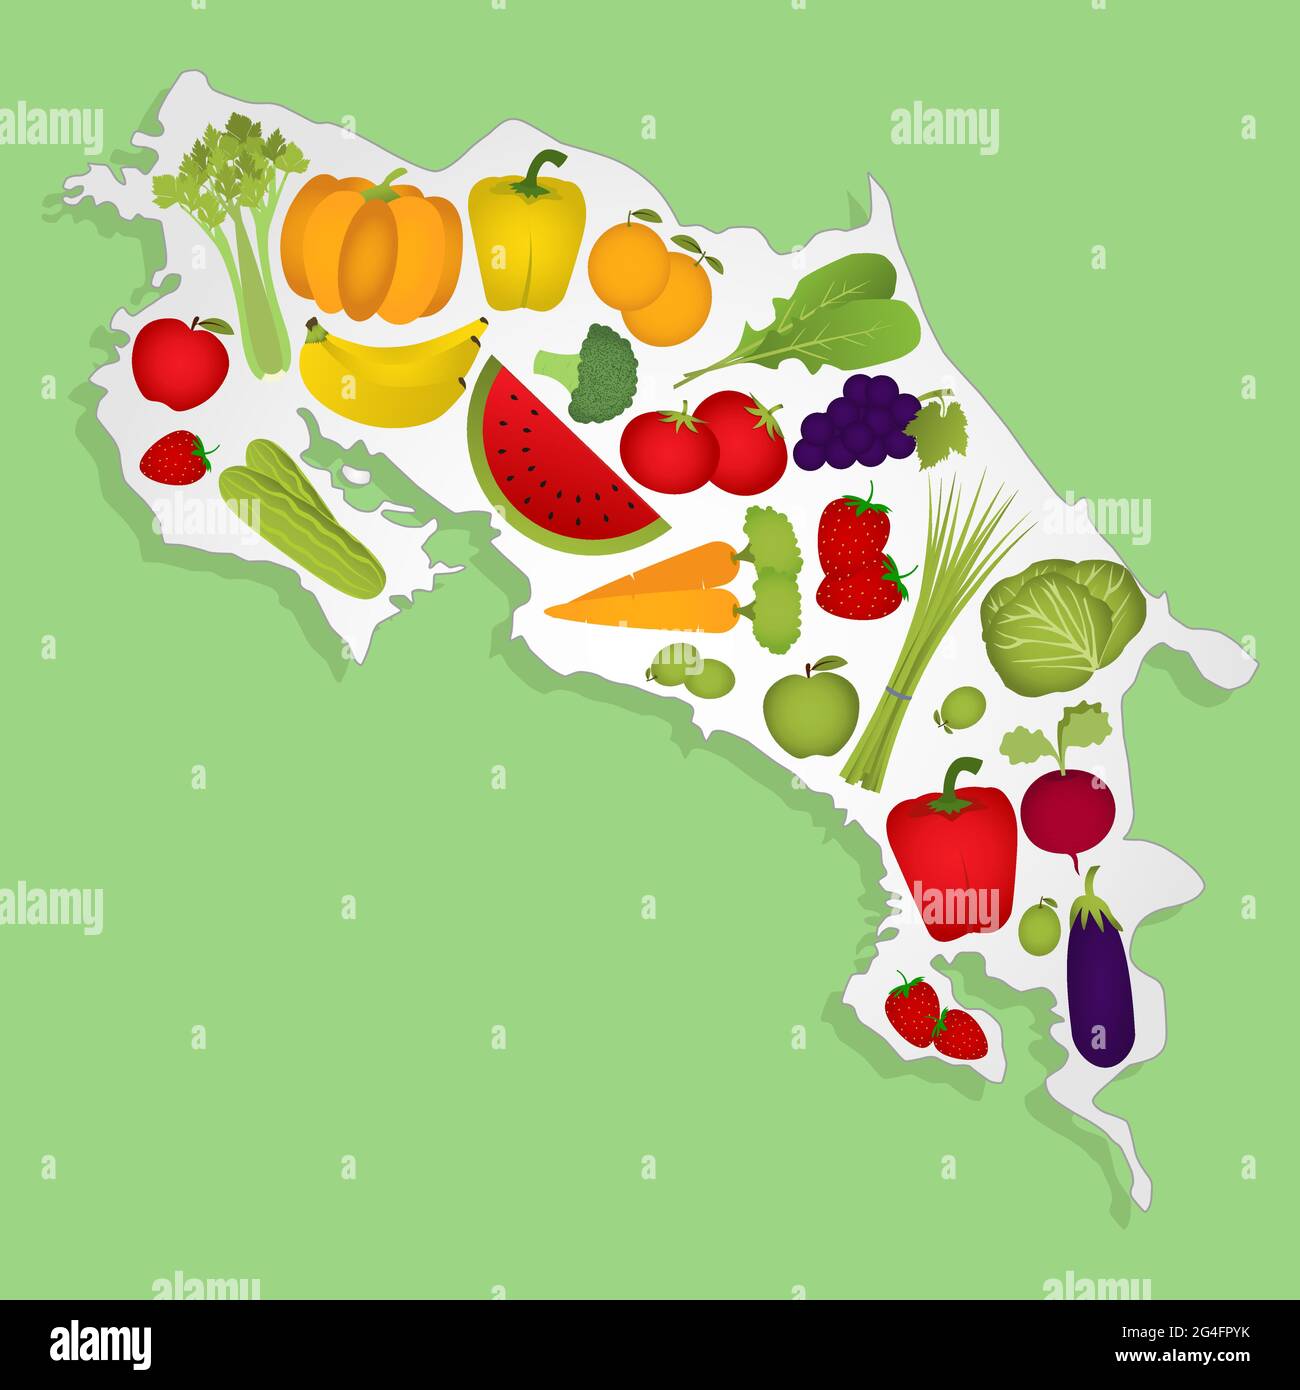 Map of Costa Rica full of fruits and vegetables (tomato , apple, orange , eggplant, cabbage, cucumber , broccoli, grapes, arugula, banana, peppers, sq Stock Vector